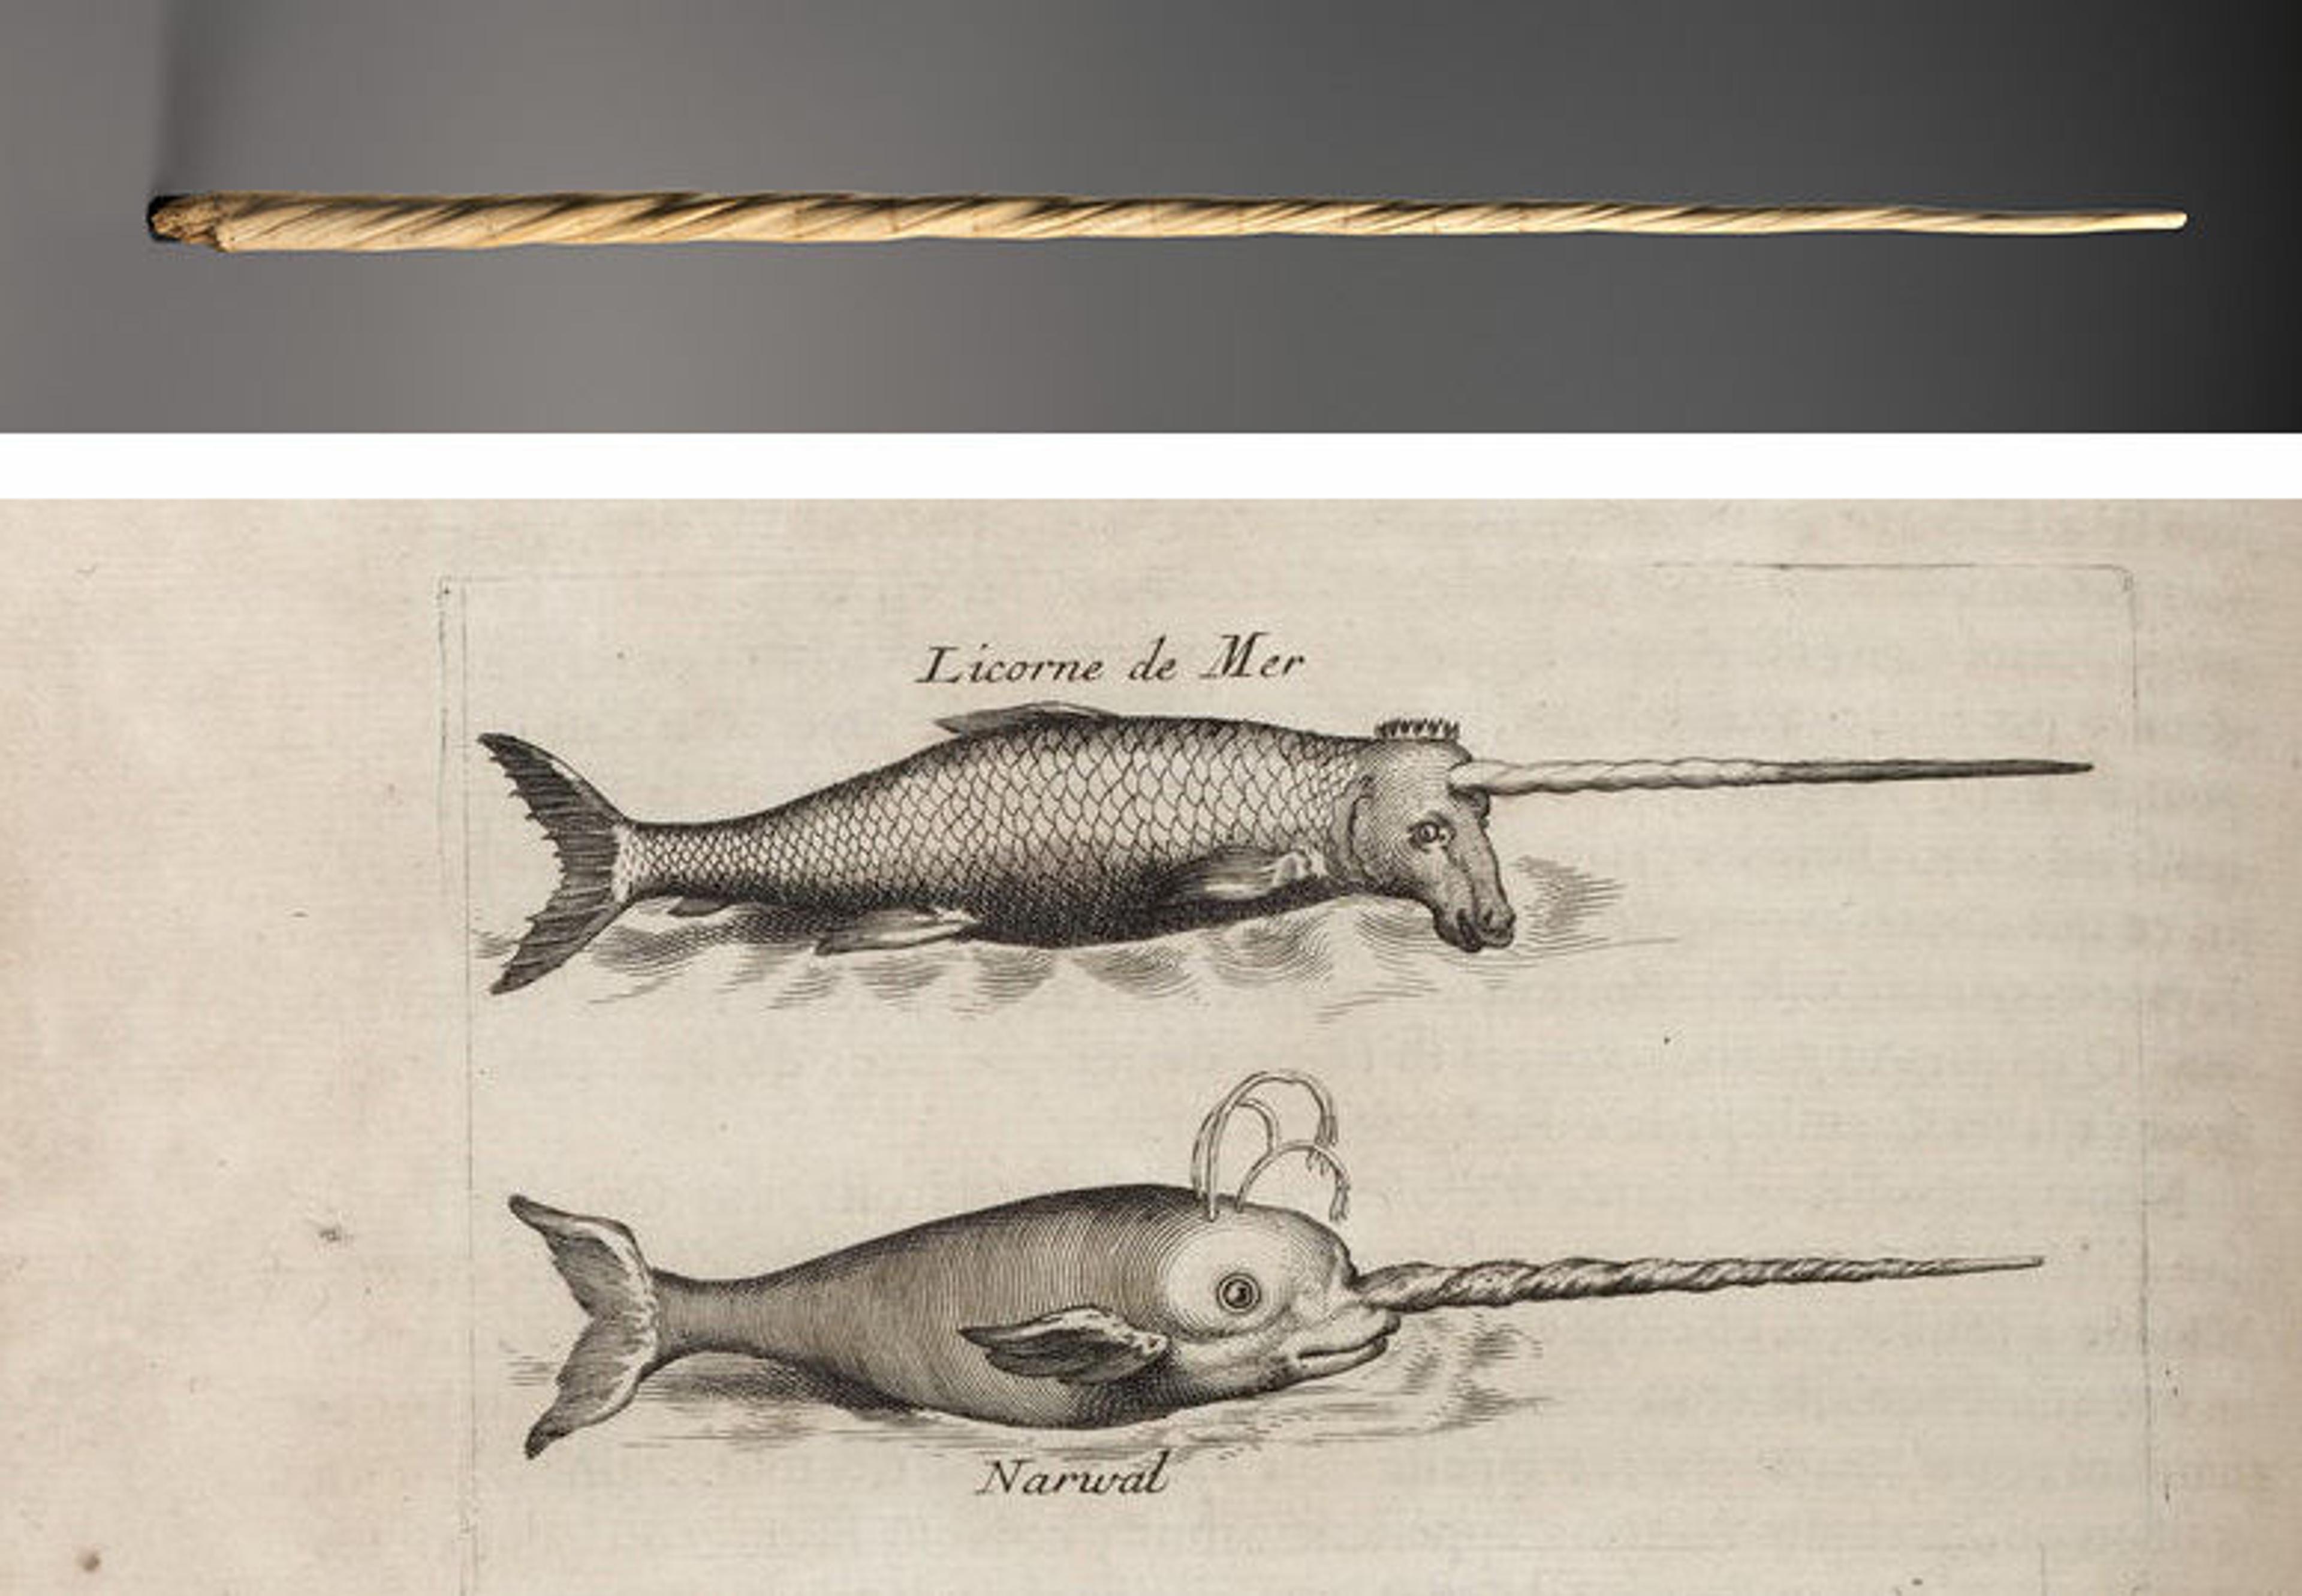 Top: a long narwhal horn oriented horizontally against a grey background. Bottom: Two black ink drawings of narwhals, one below the other. Neither appear to be scientifically accurate, although they appear to be from a scientific textbook. The words "Licorne de Mer" are above the top narwhal and the word "Narwhal" is below the bottom narwhal.